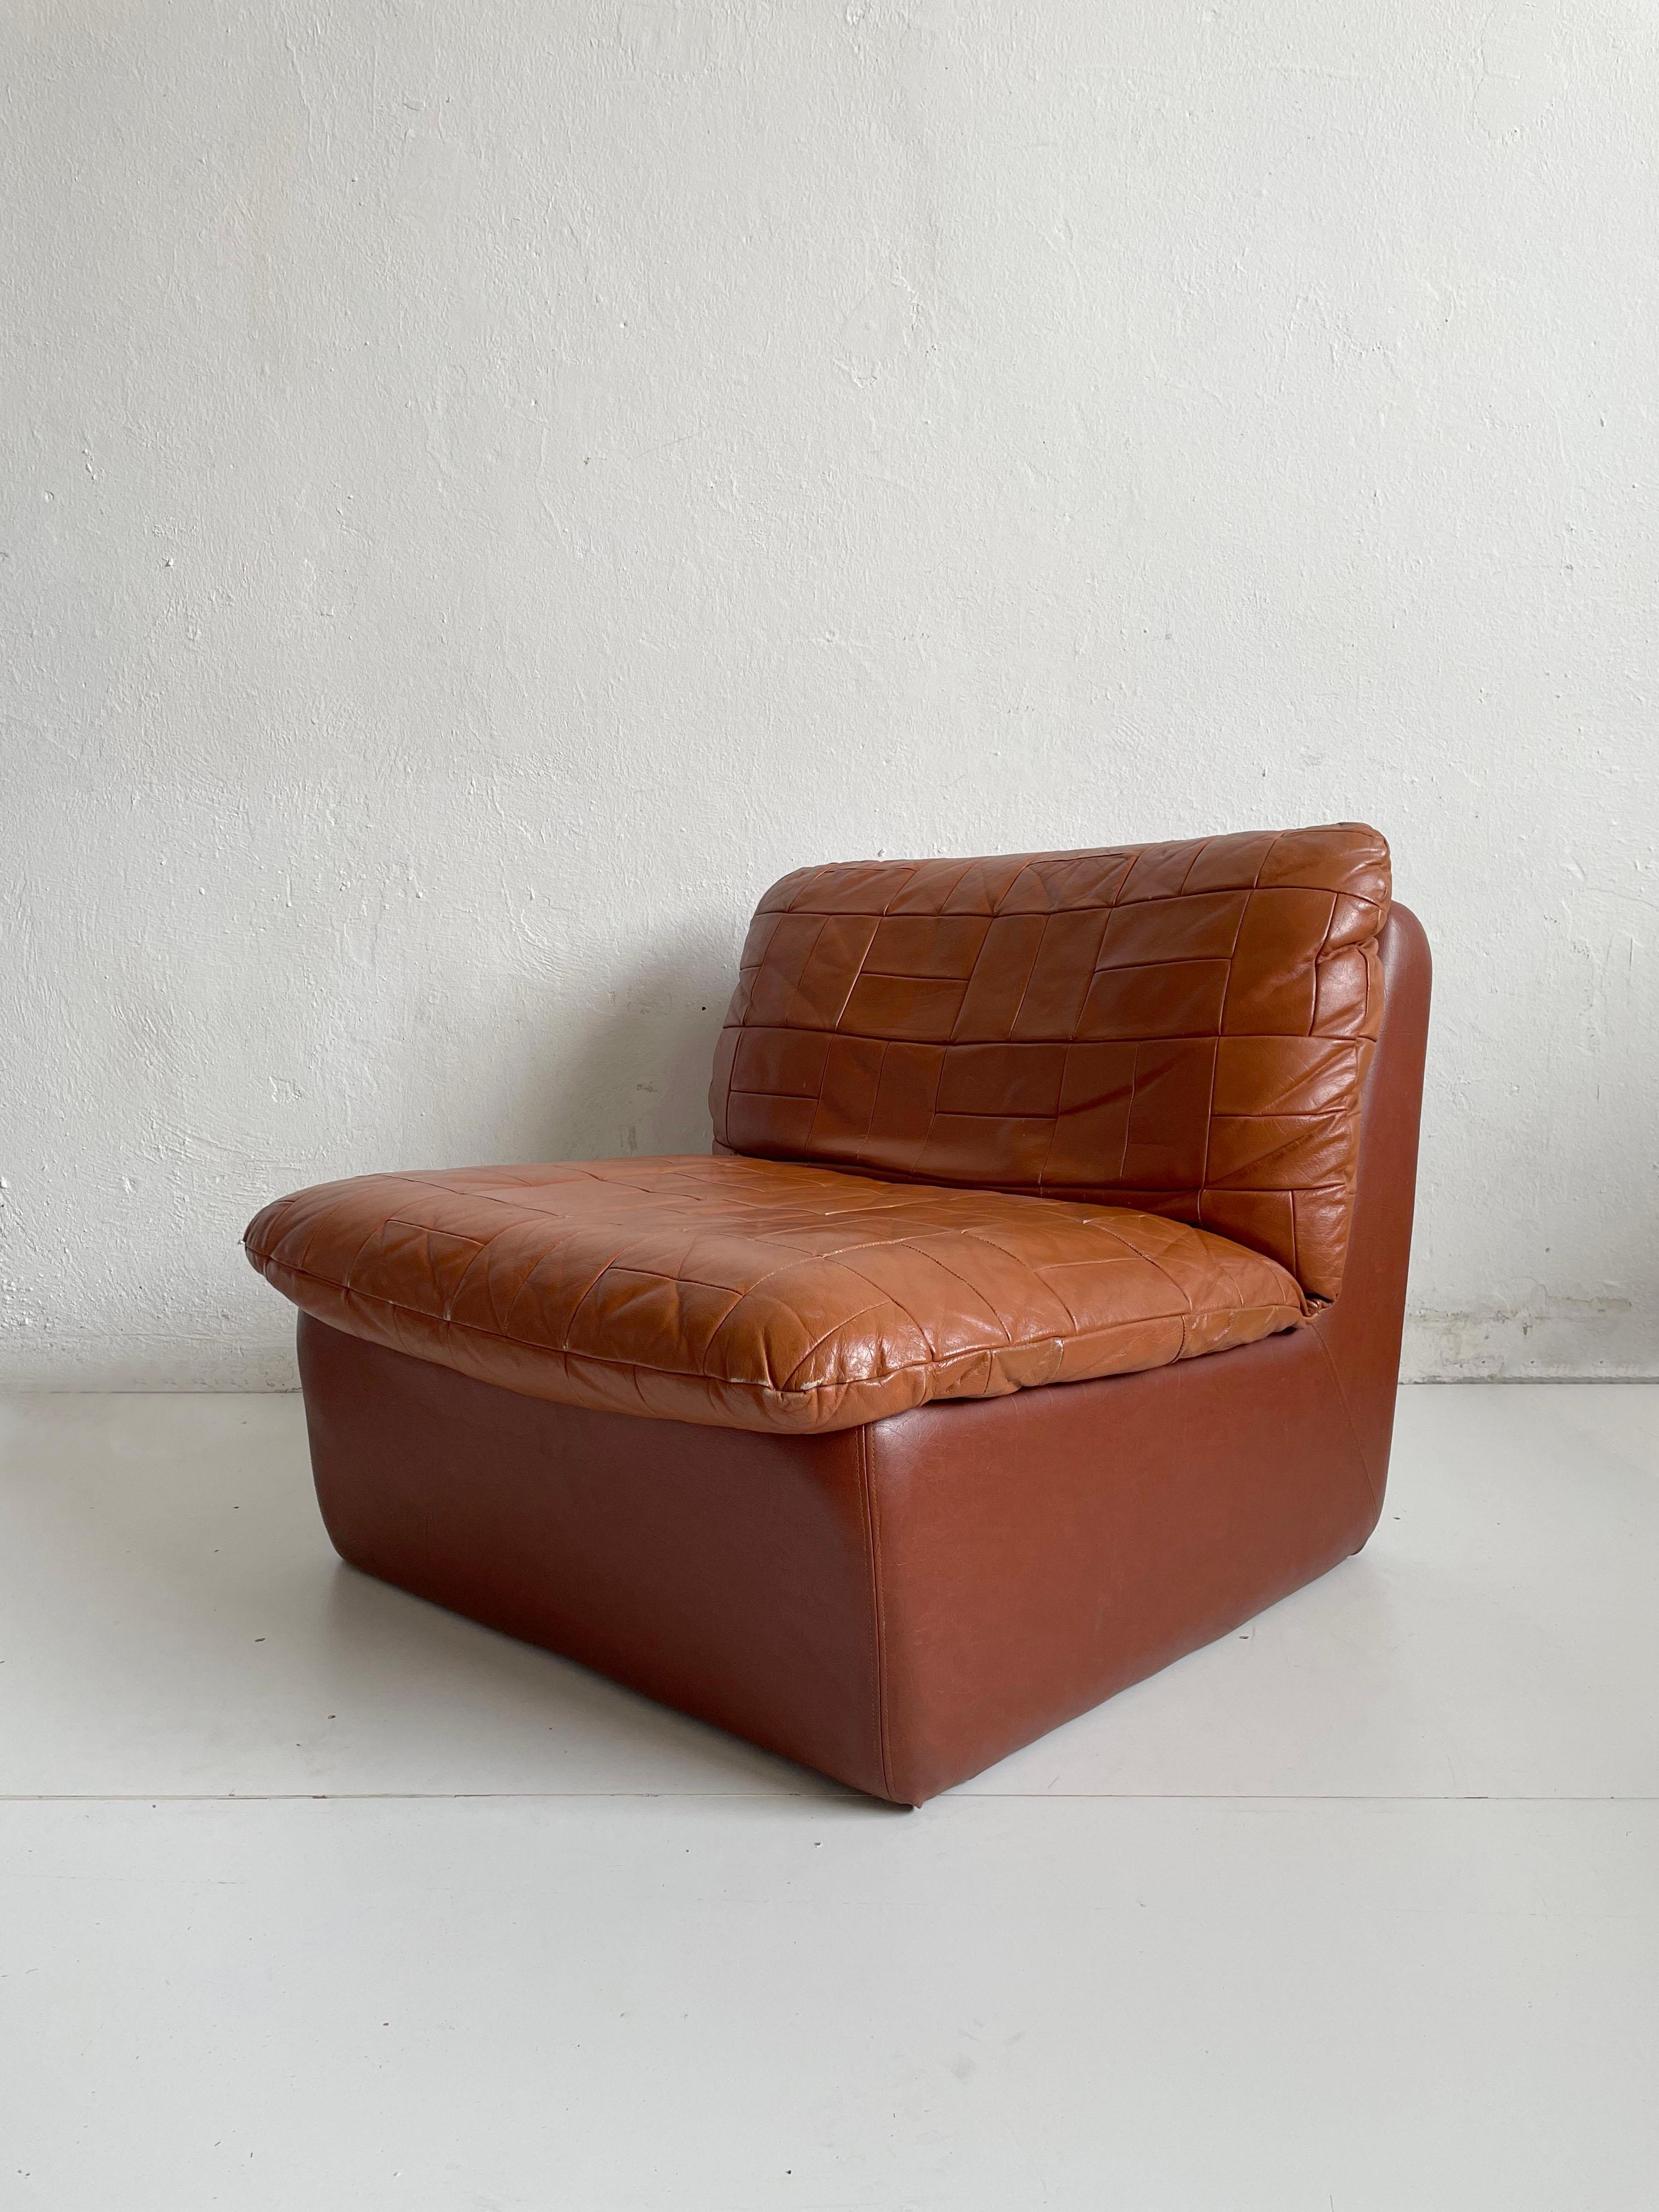 Late 20th Century Swedish Modern Leather Patchwork Lounge Chair by Overman, 1970s